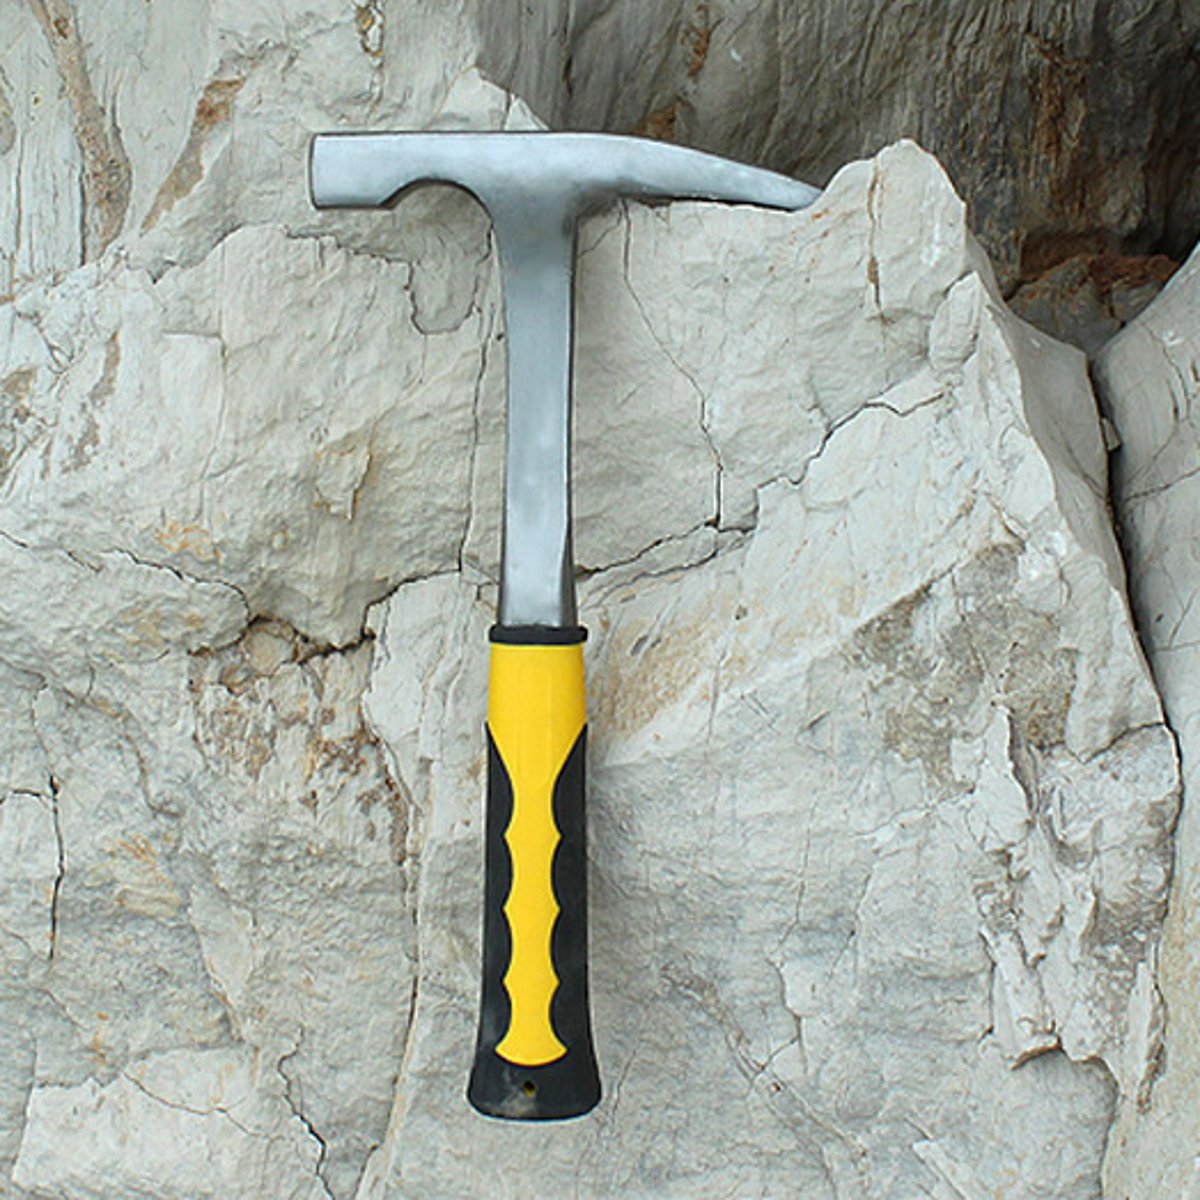 Shock-Reduction-Edge-Sharpness-Geological-Hammer-Geology-Tool-Hammers-1545586-8